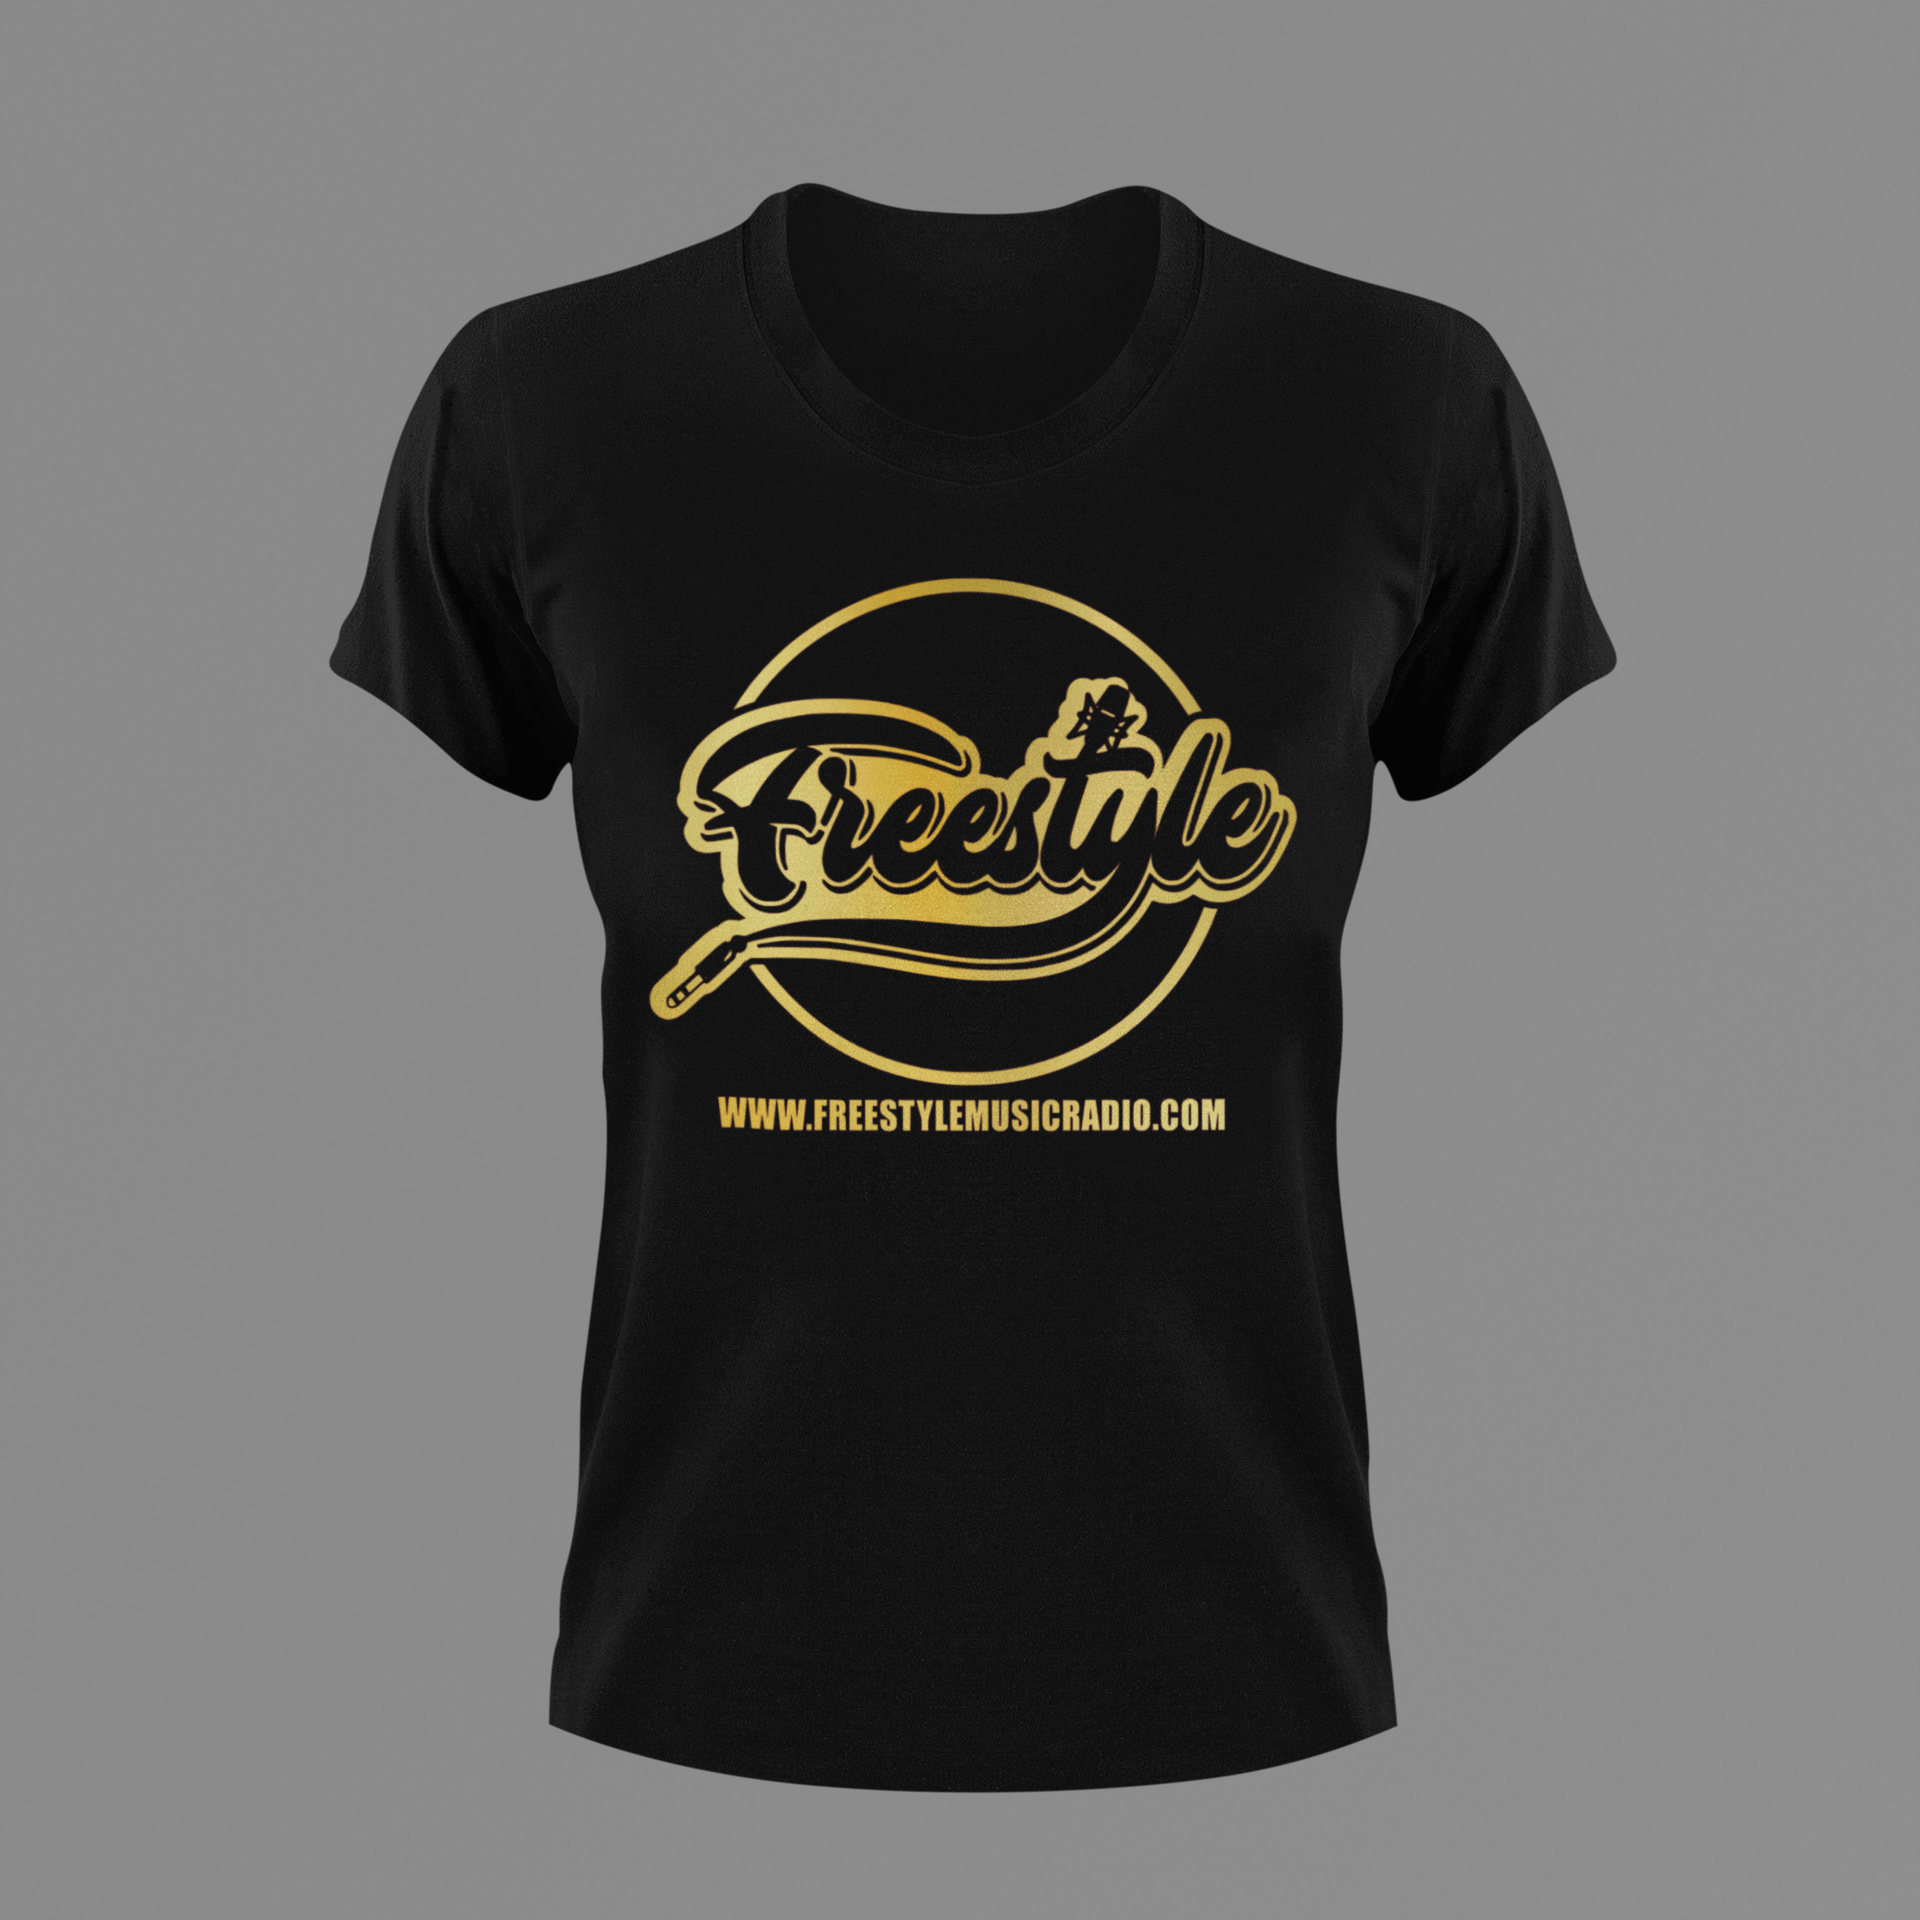 Official Freestyle Music Radio Tee New Edition.